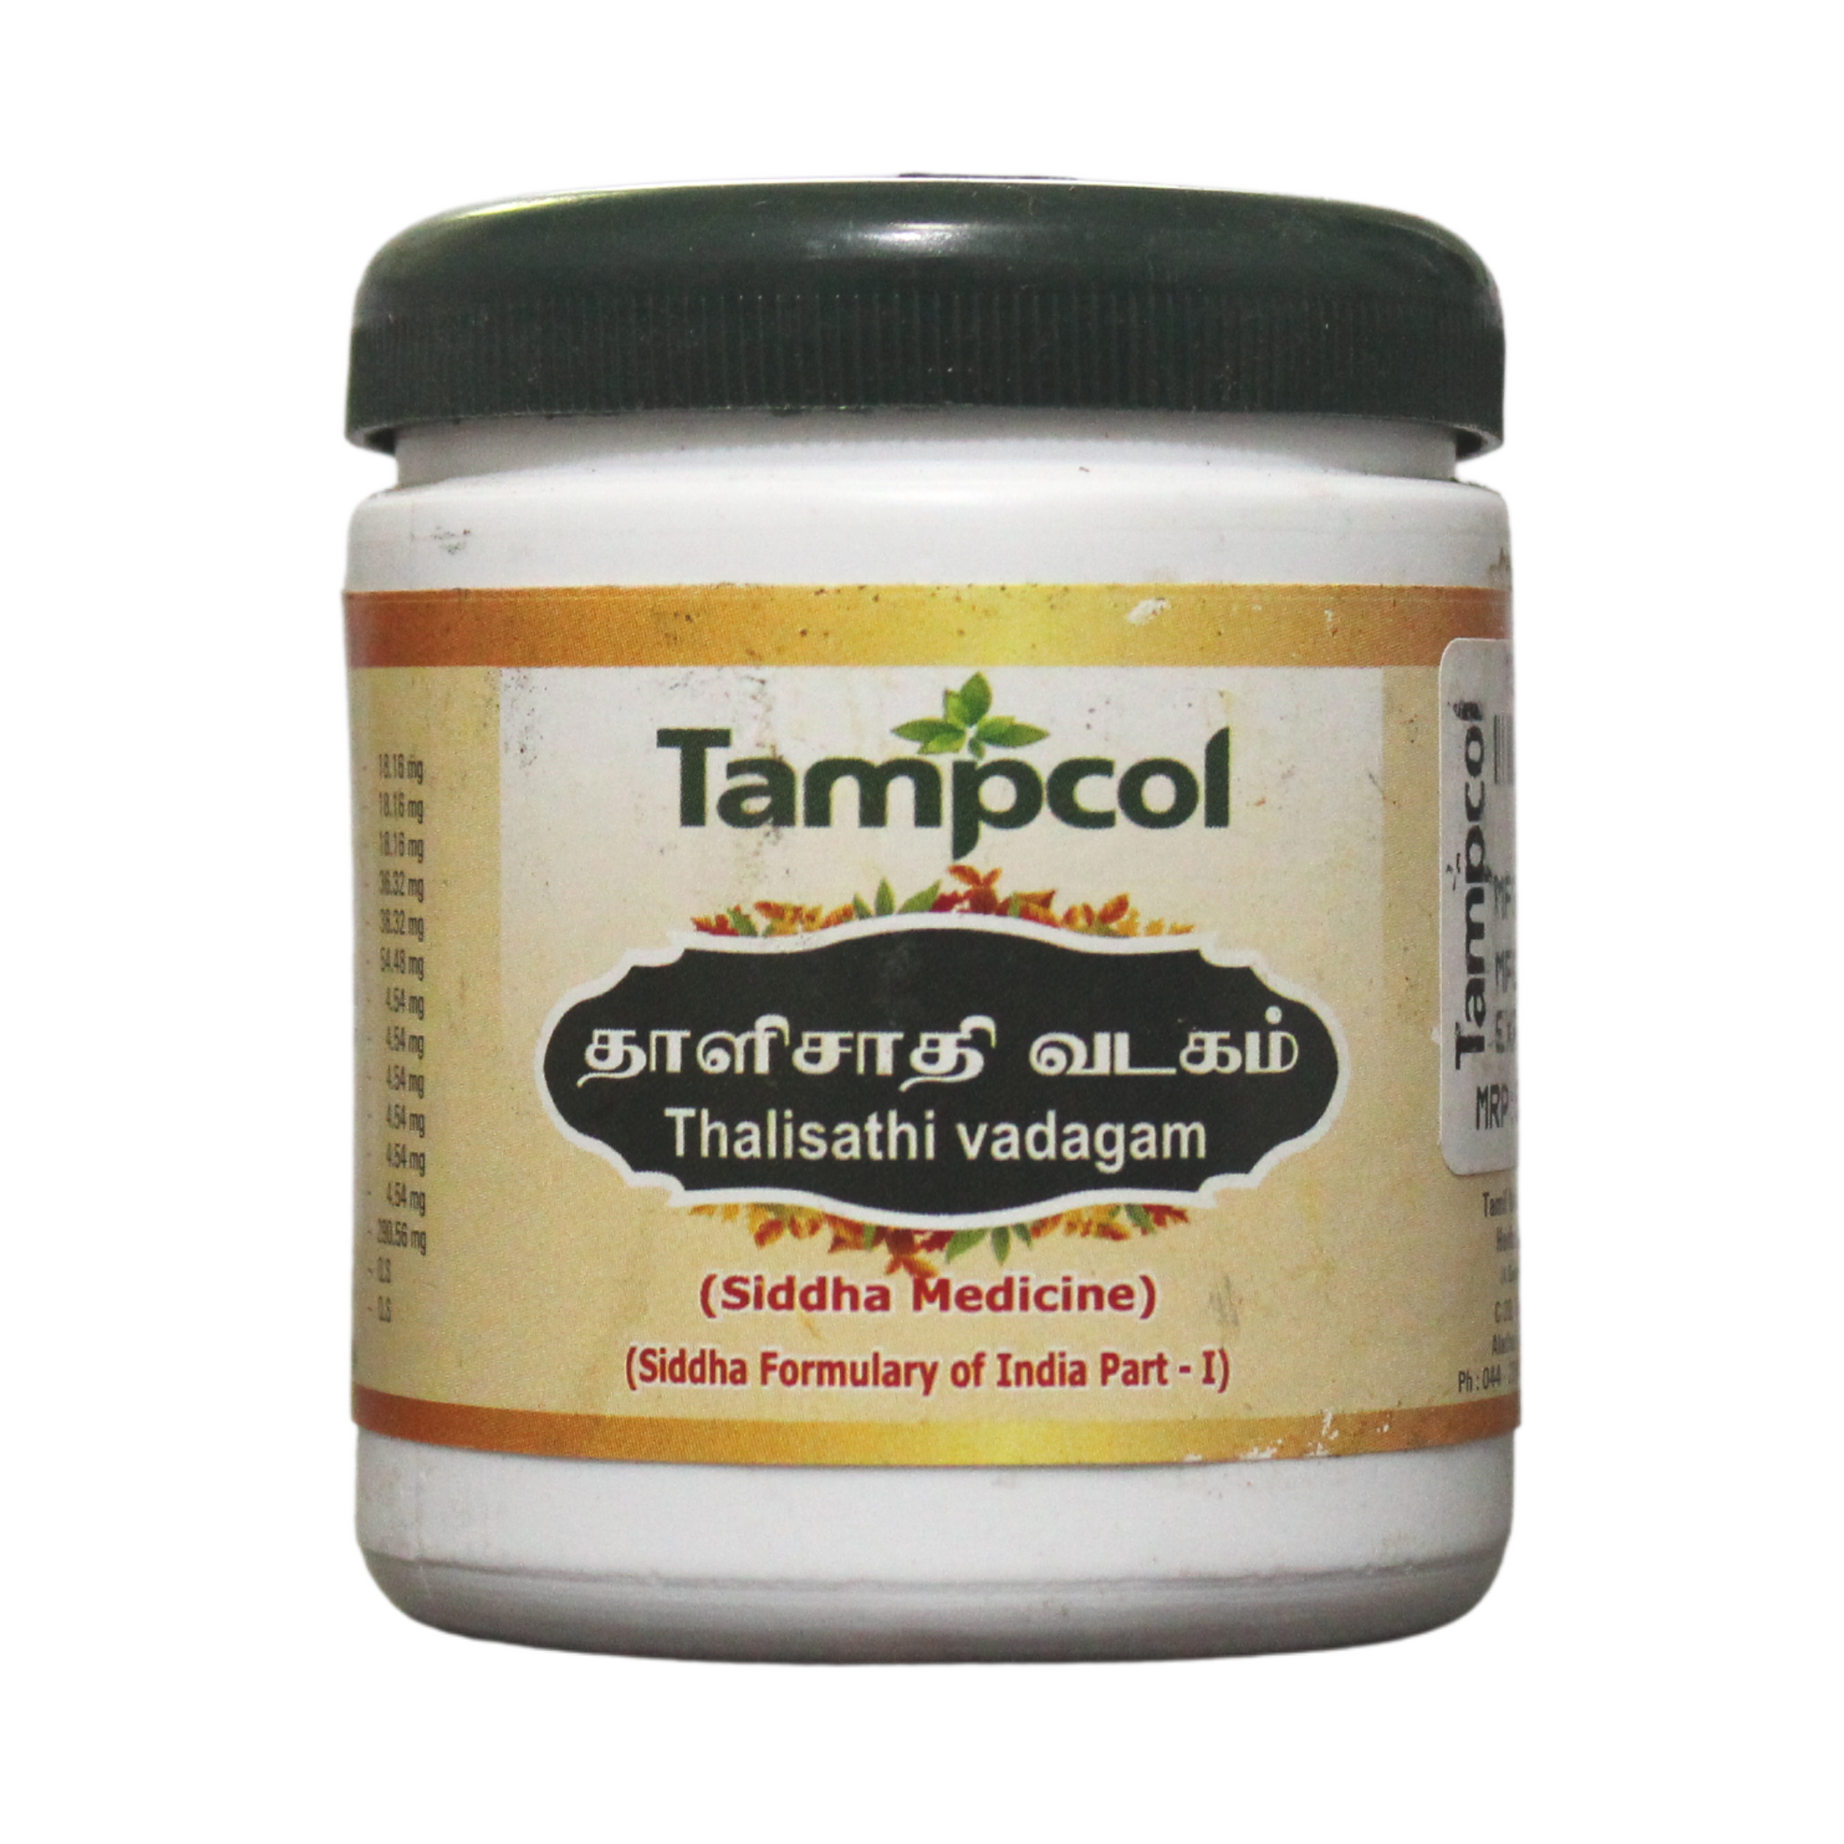 Shop Tampcol Thaleesadi Vatagam Tablets - 100 Tablets at price 51.75 from Tampcol Online - Ayush Care